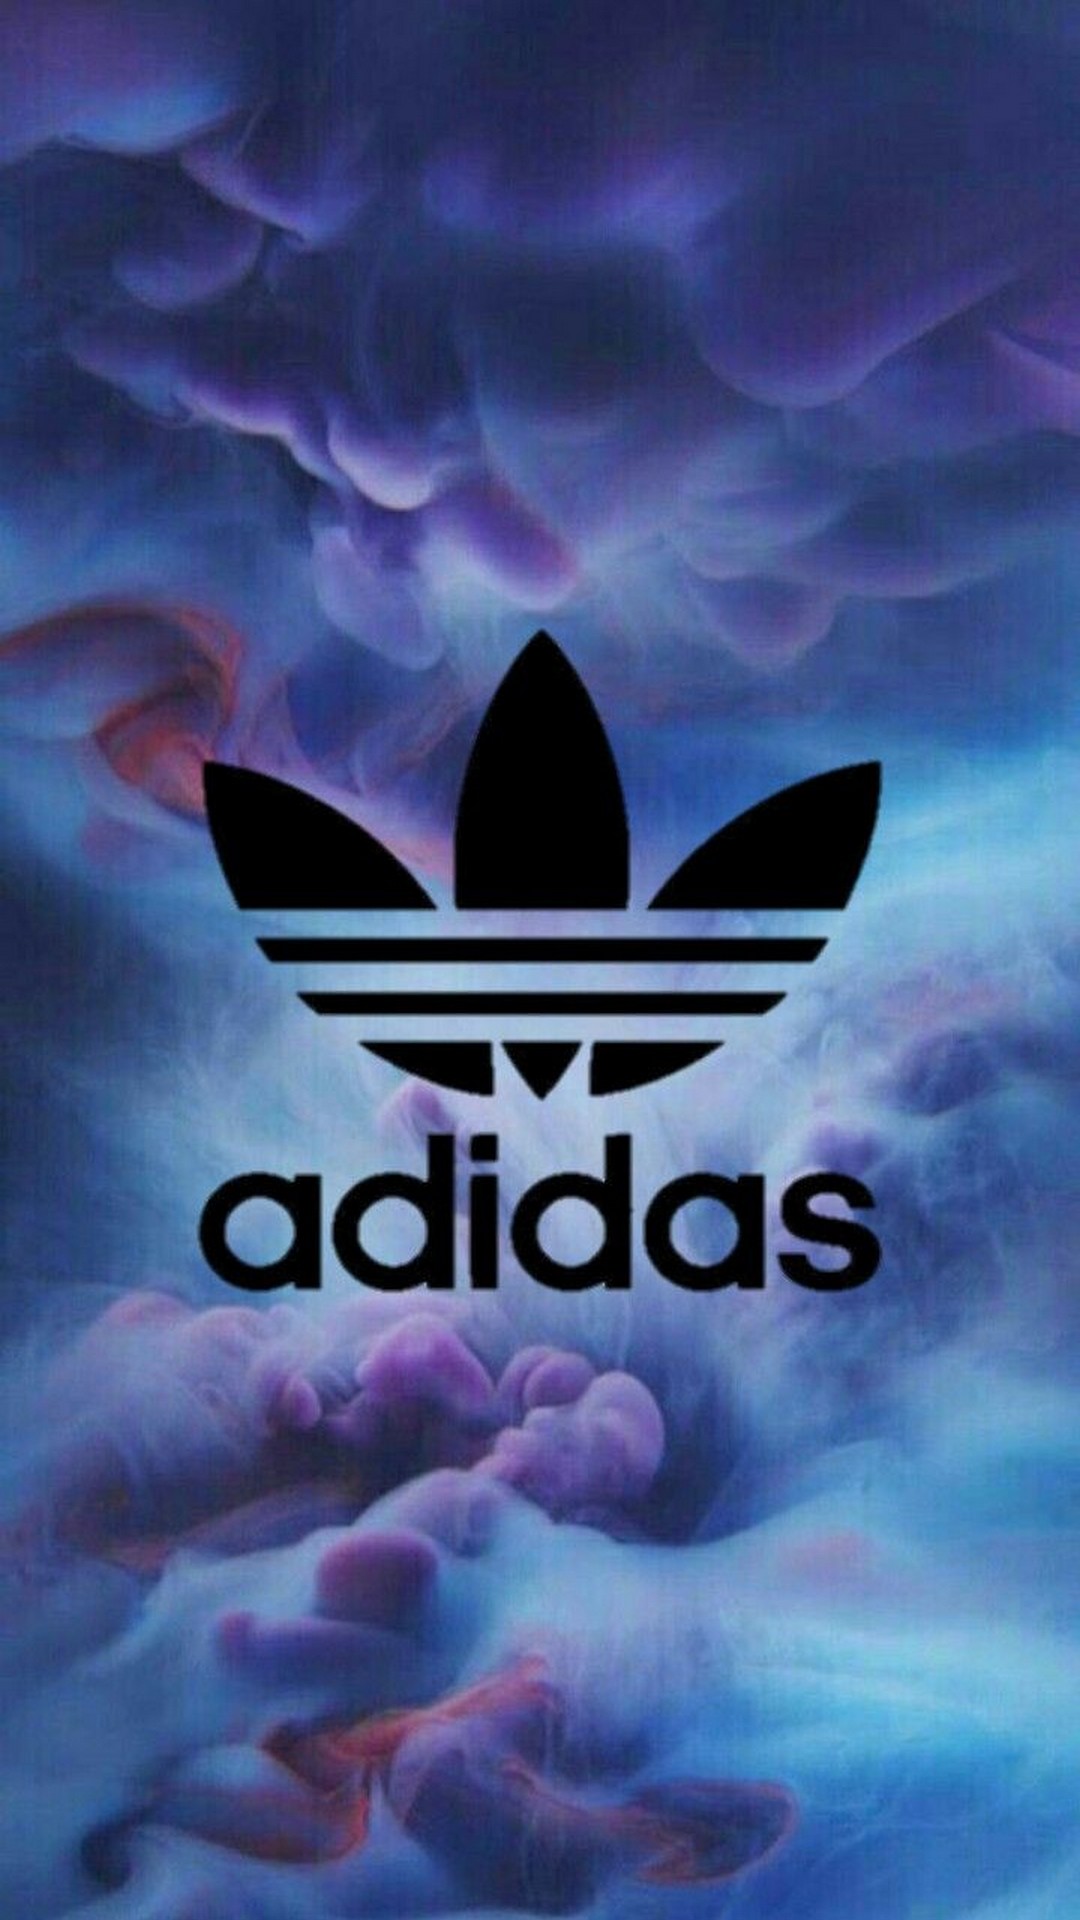 Adidas iPhone 6 Wallpaper with high-resolution 1080x1920 pixel. You can use this wallpaper for your iPhone 5, 6, 7, 8, X, XS, XR backgrounds, Mobile Screensaver, or iPad Lock Screen